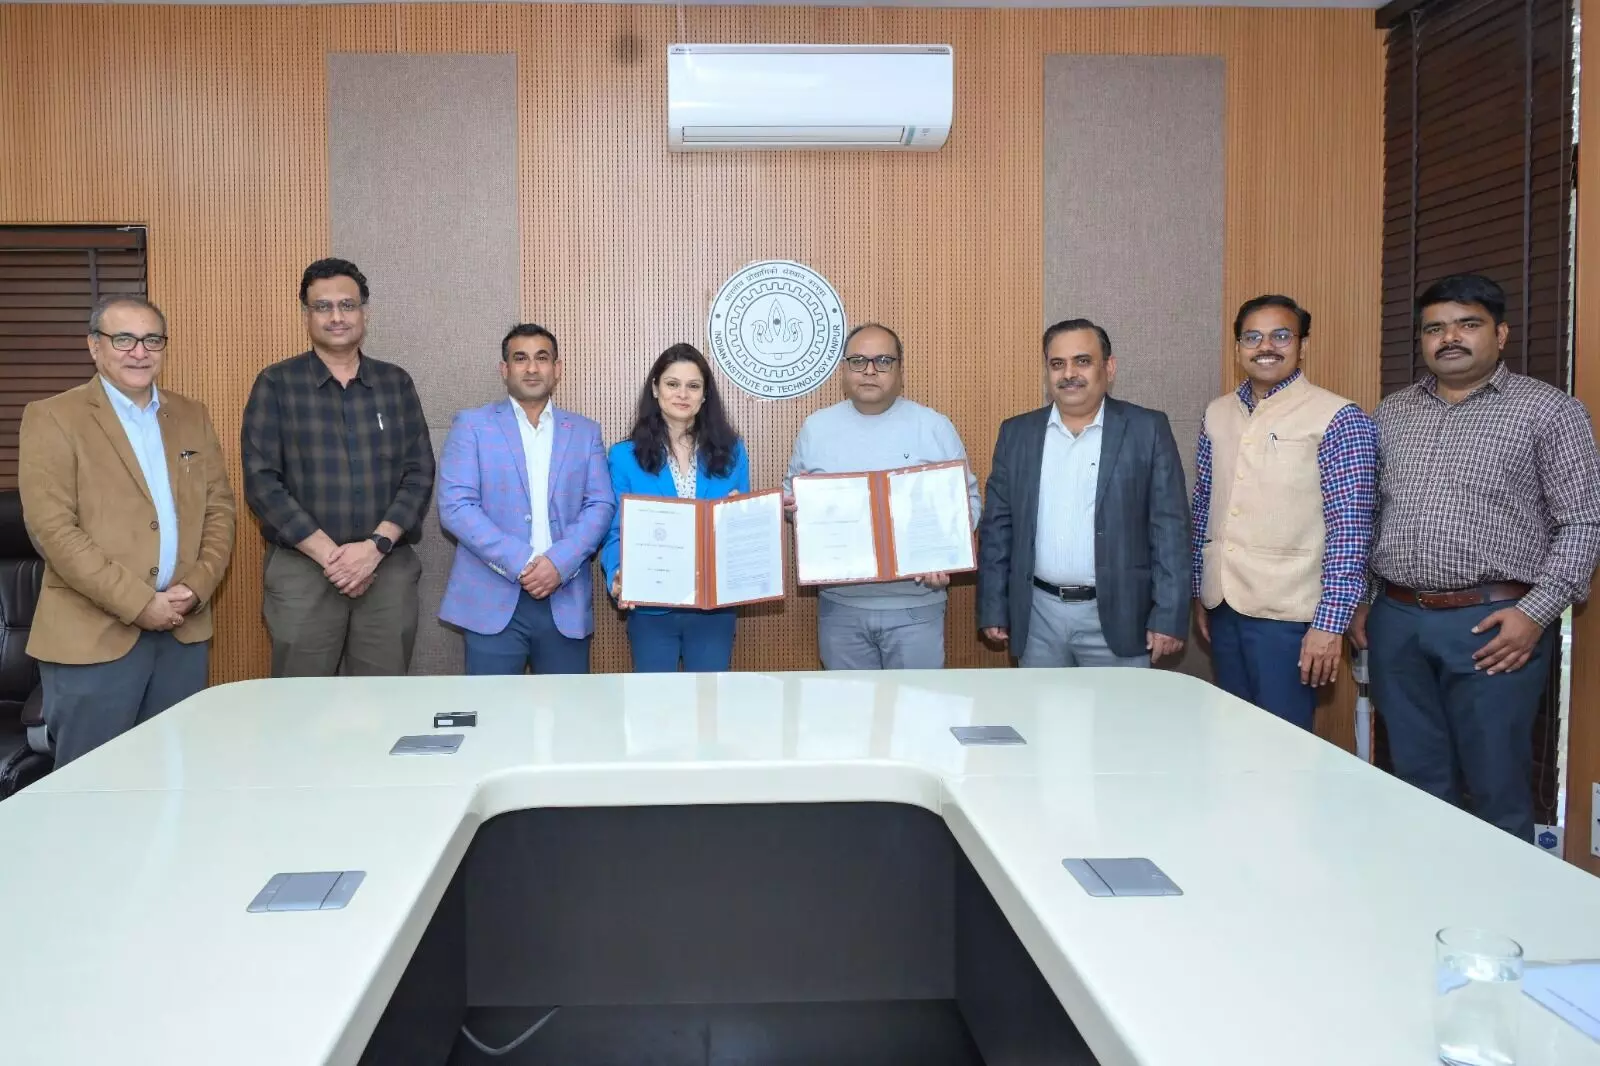 IIT Kanpur signs MoU with Conlis Global Inc.